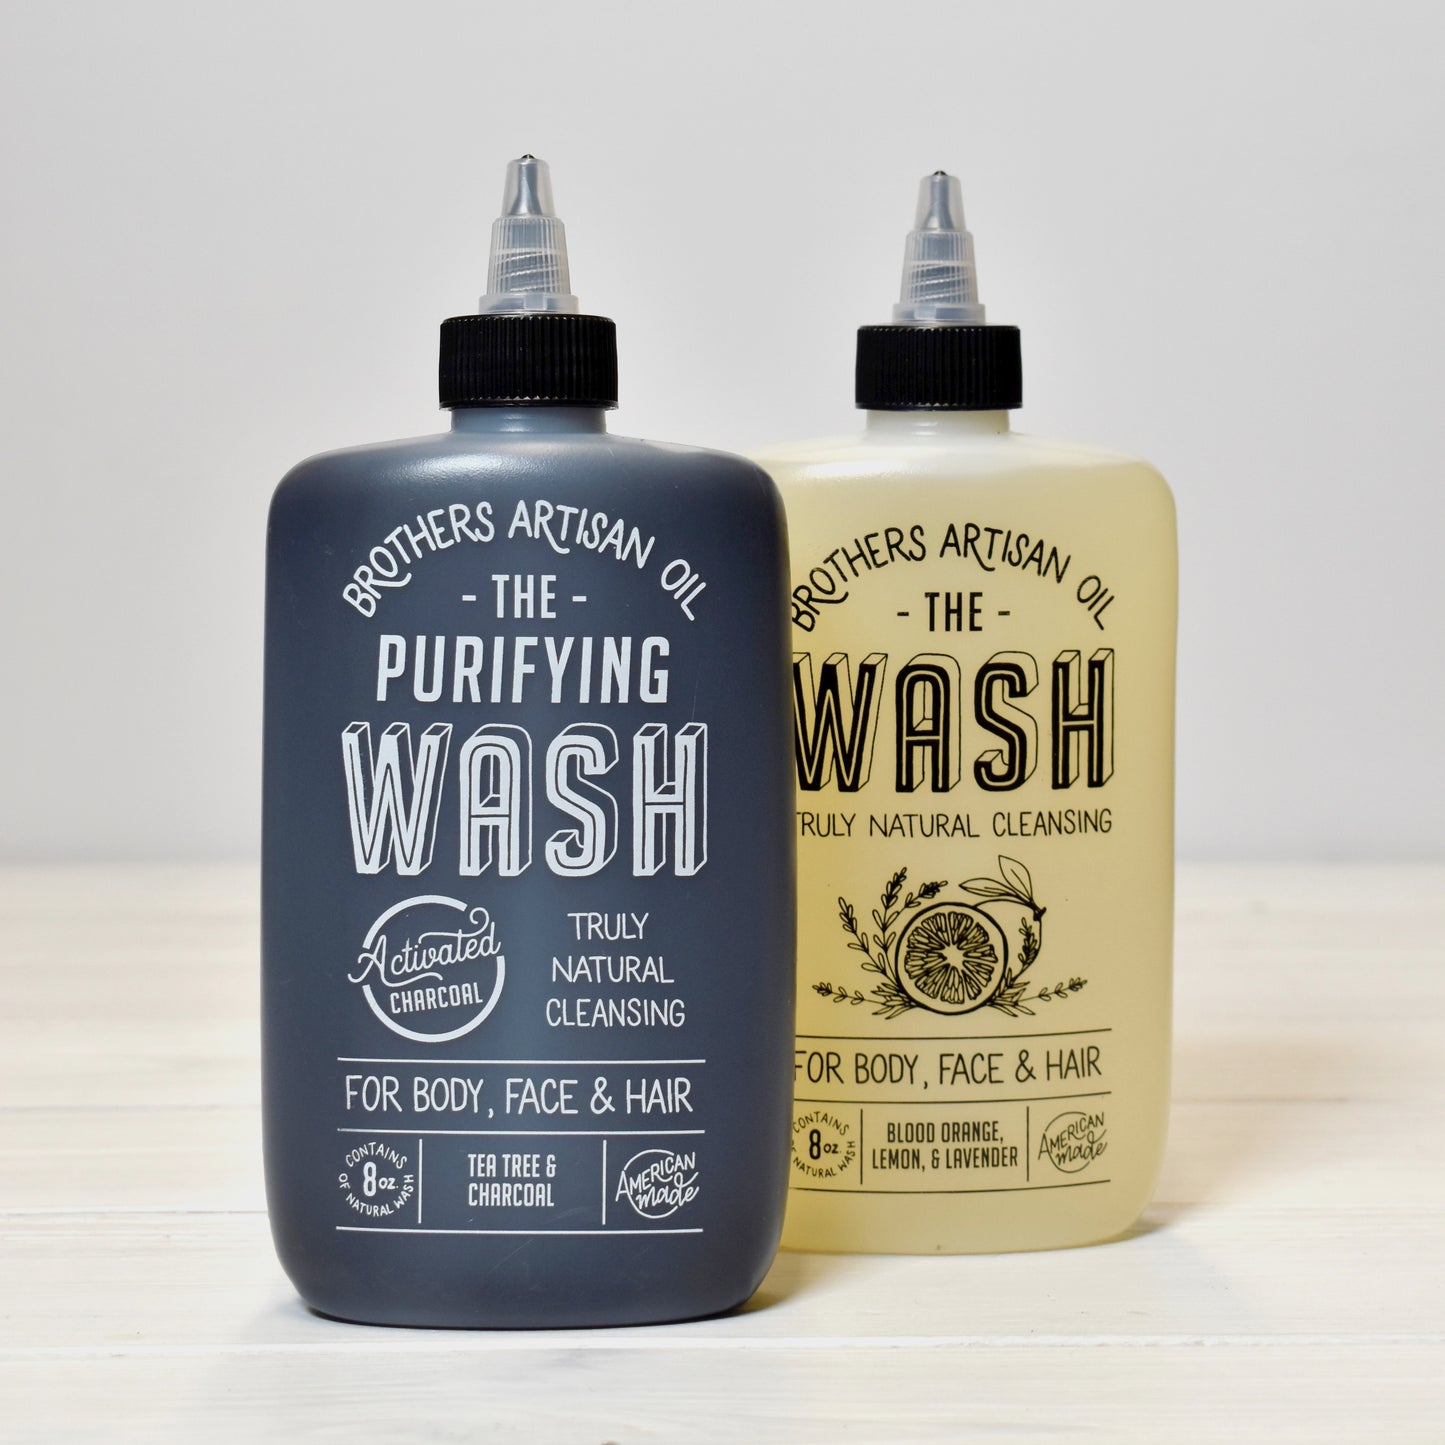 The Purifying Wash from Brothers Artisan Oil